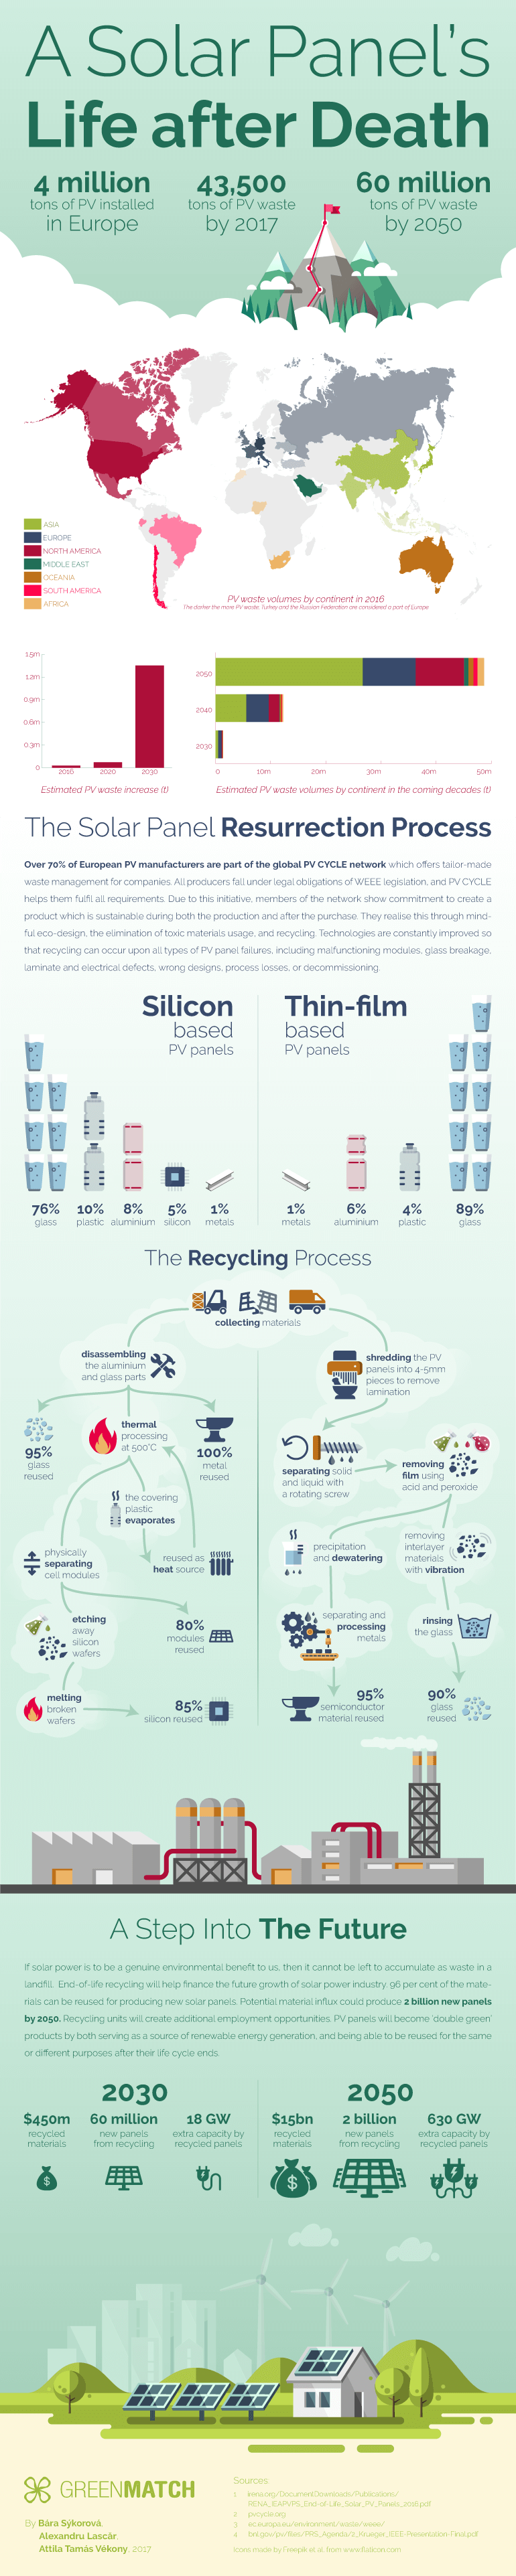 Recycling: A Solar Panels Life after Death [infographic]